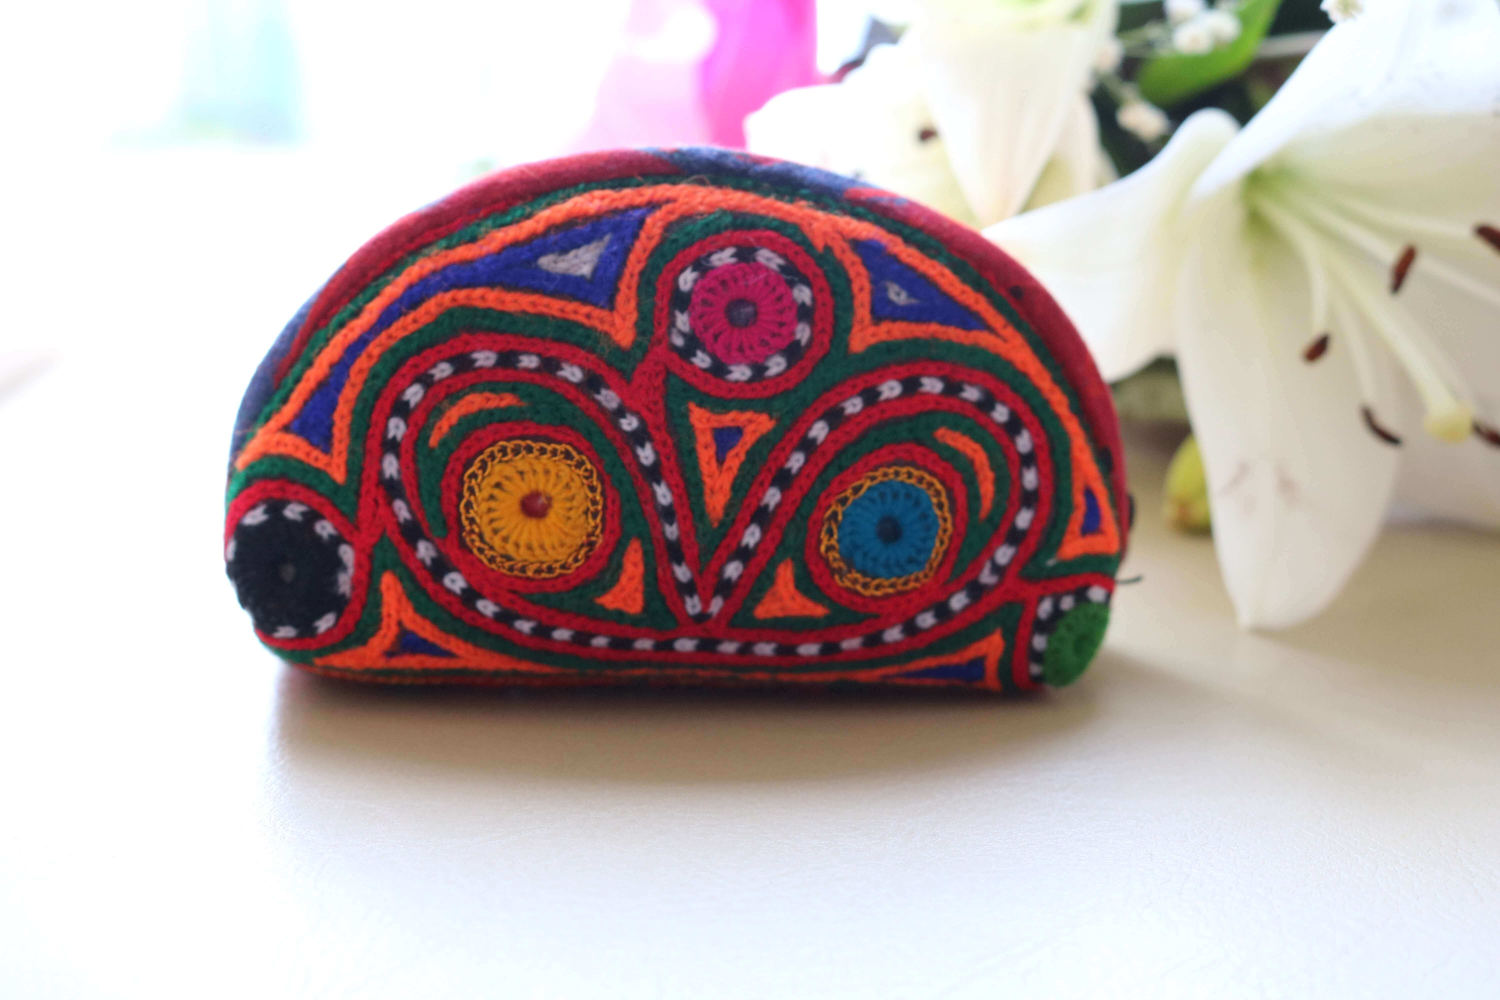 handmade women small coin purse hand embroidered by artisans. small key purse thoughtful gift for her. ethical and fair trade